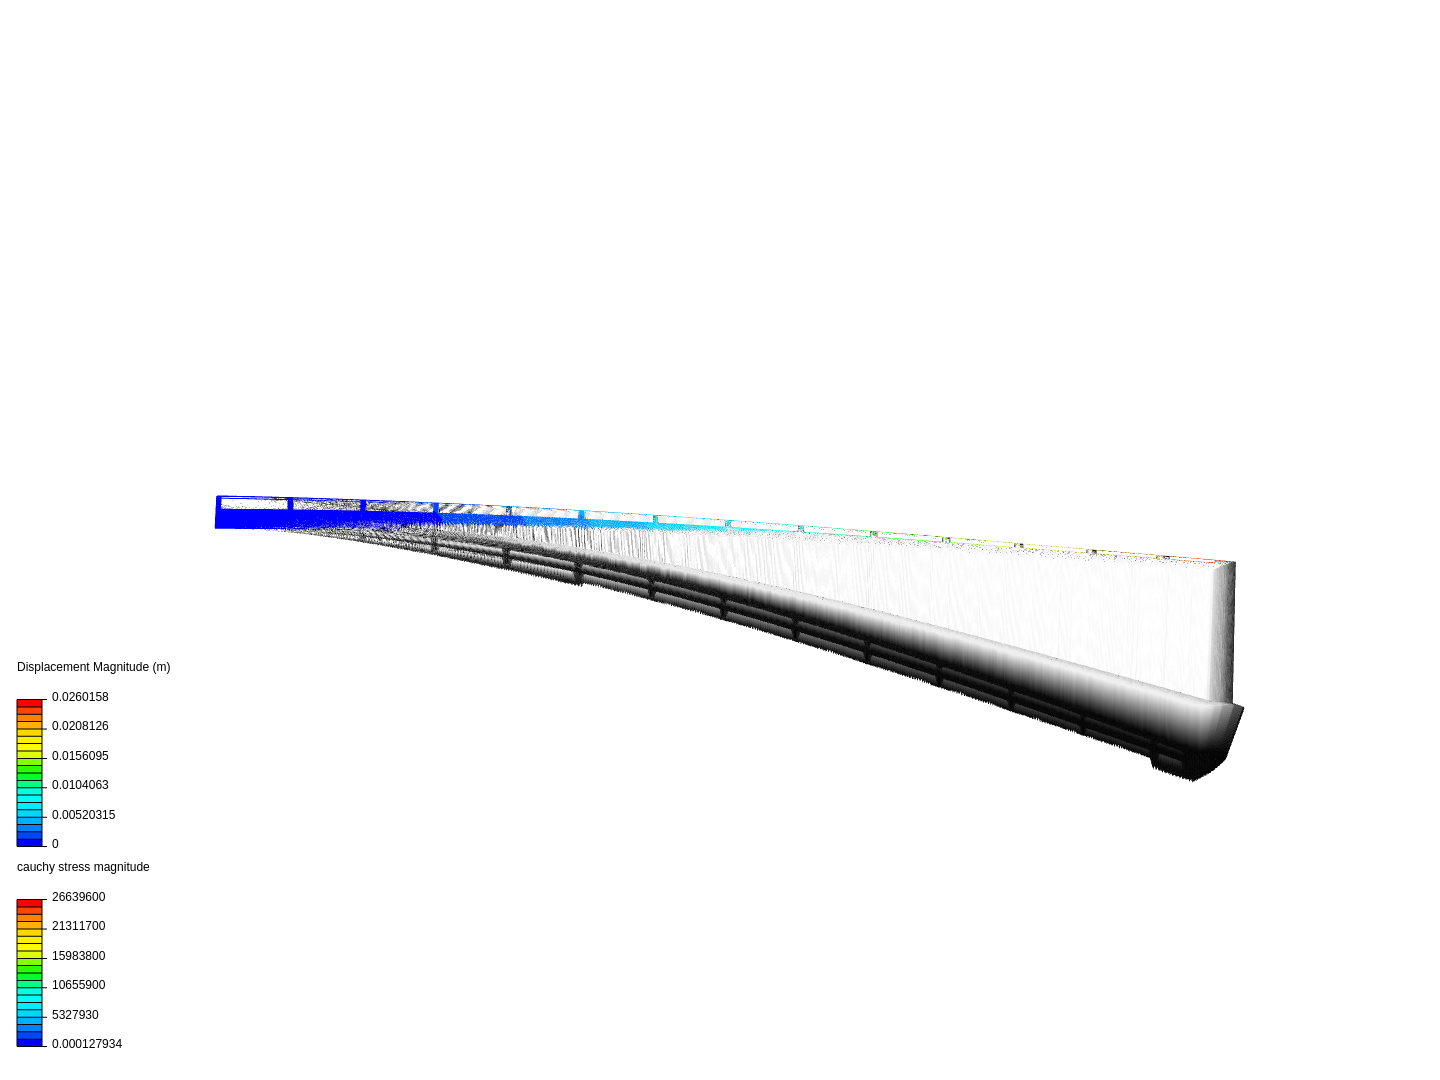 Bending of an airfoil image